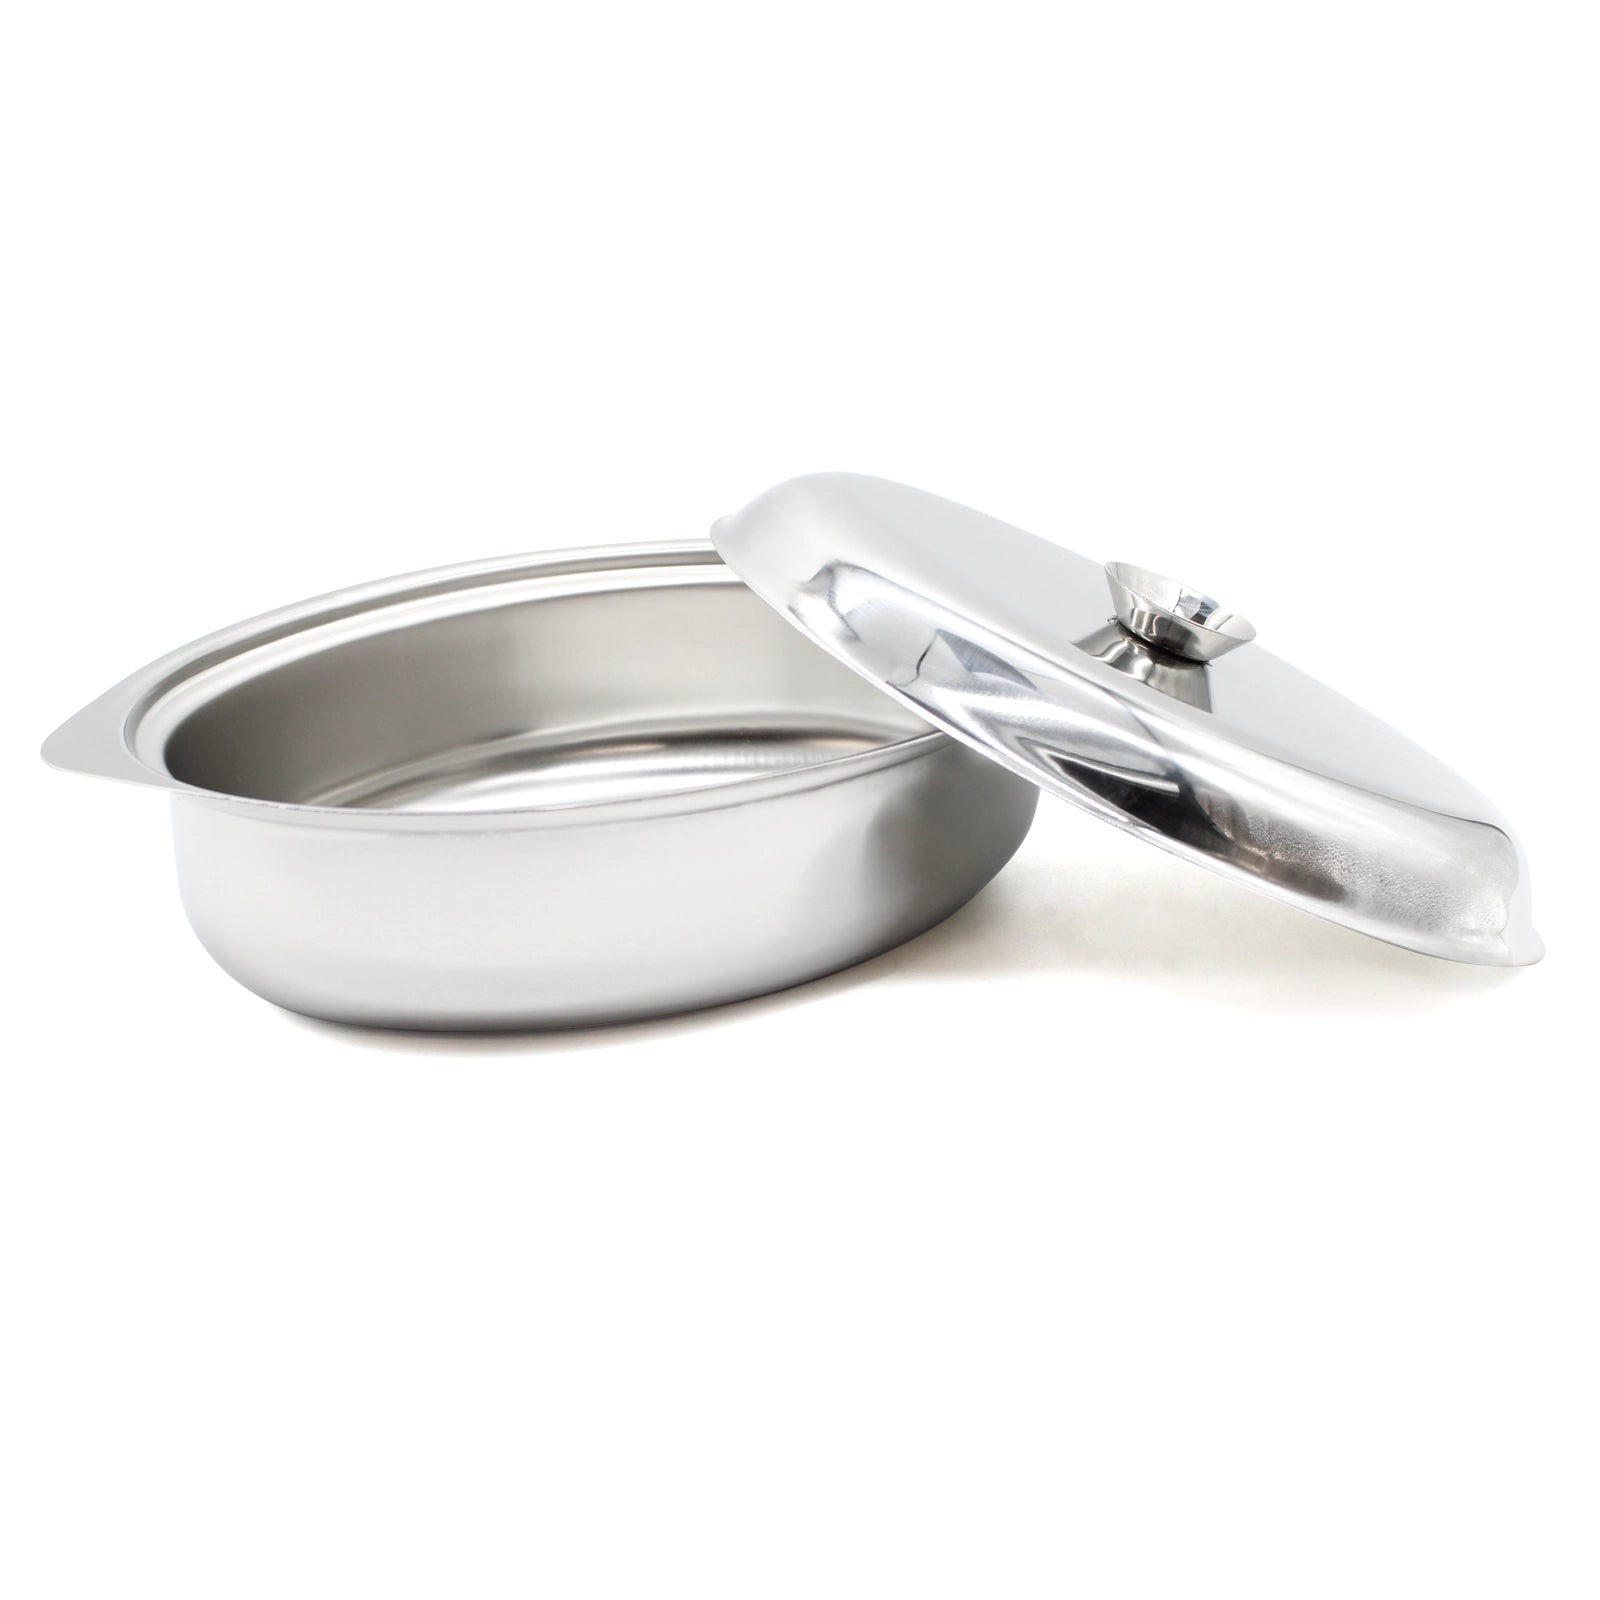 Stainless Steel Casserole Dish for Home Cooking